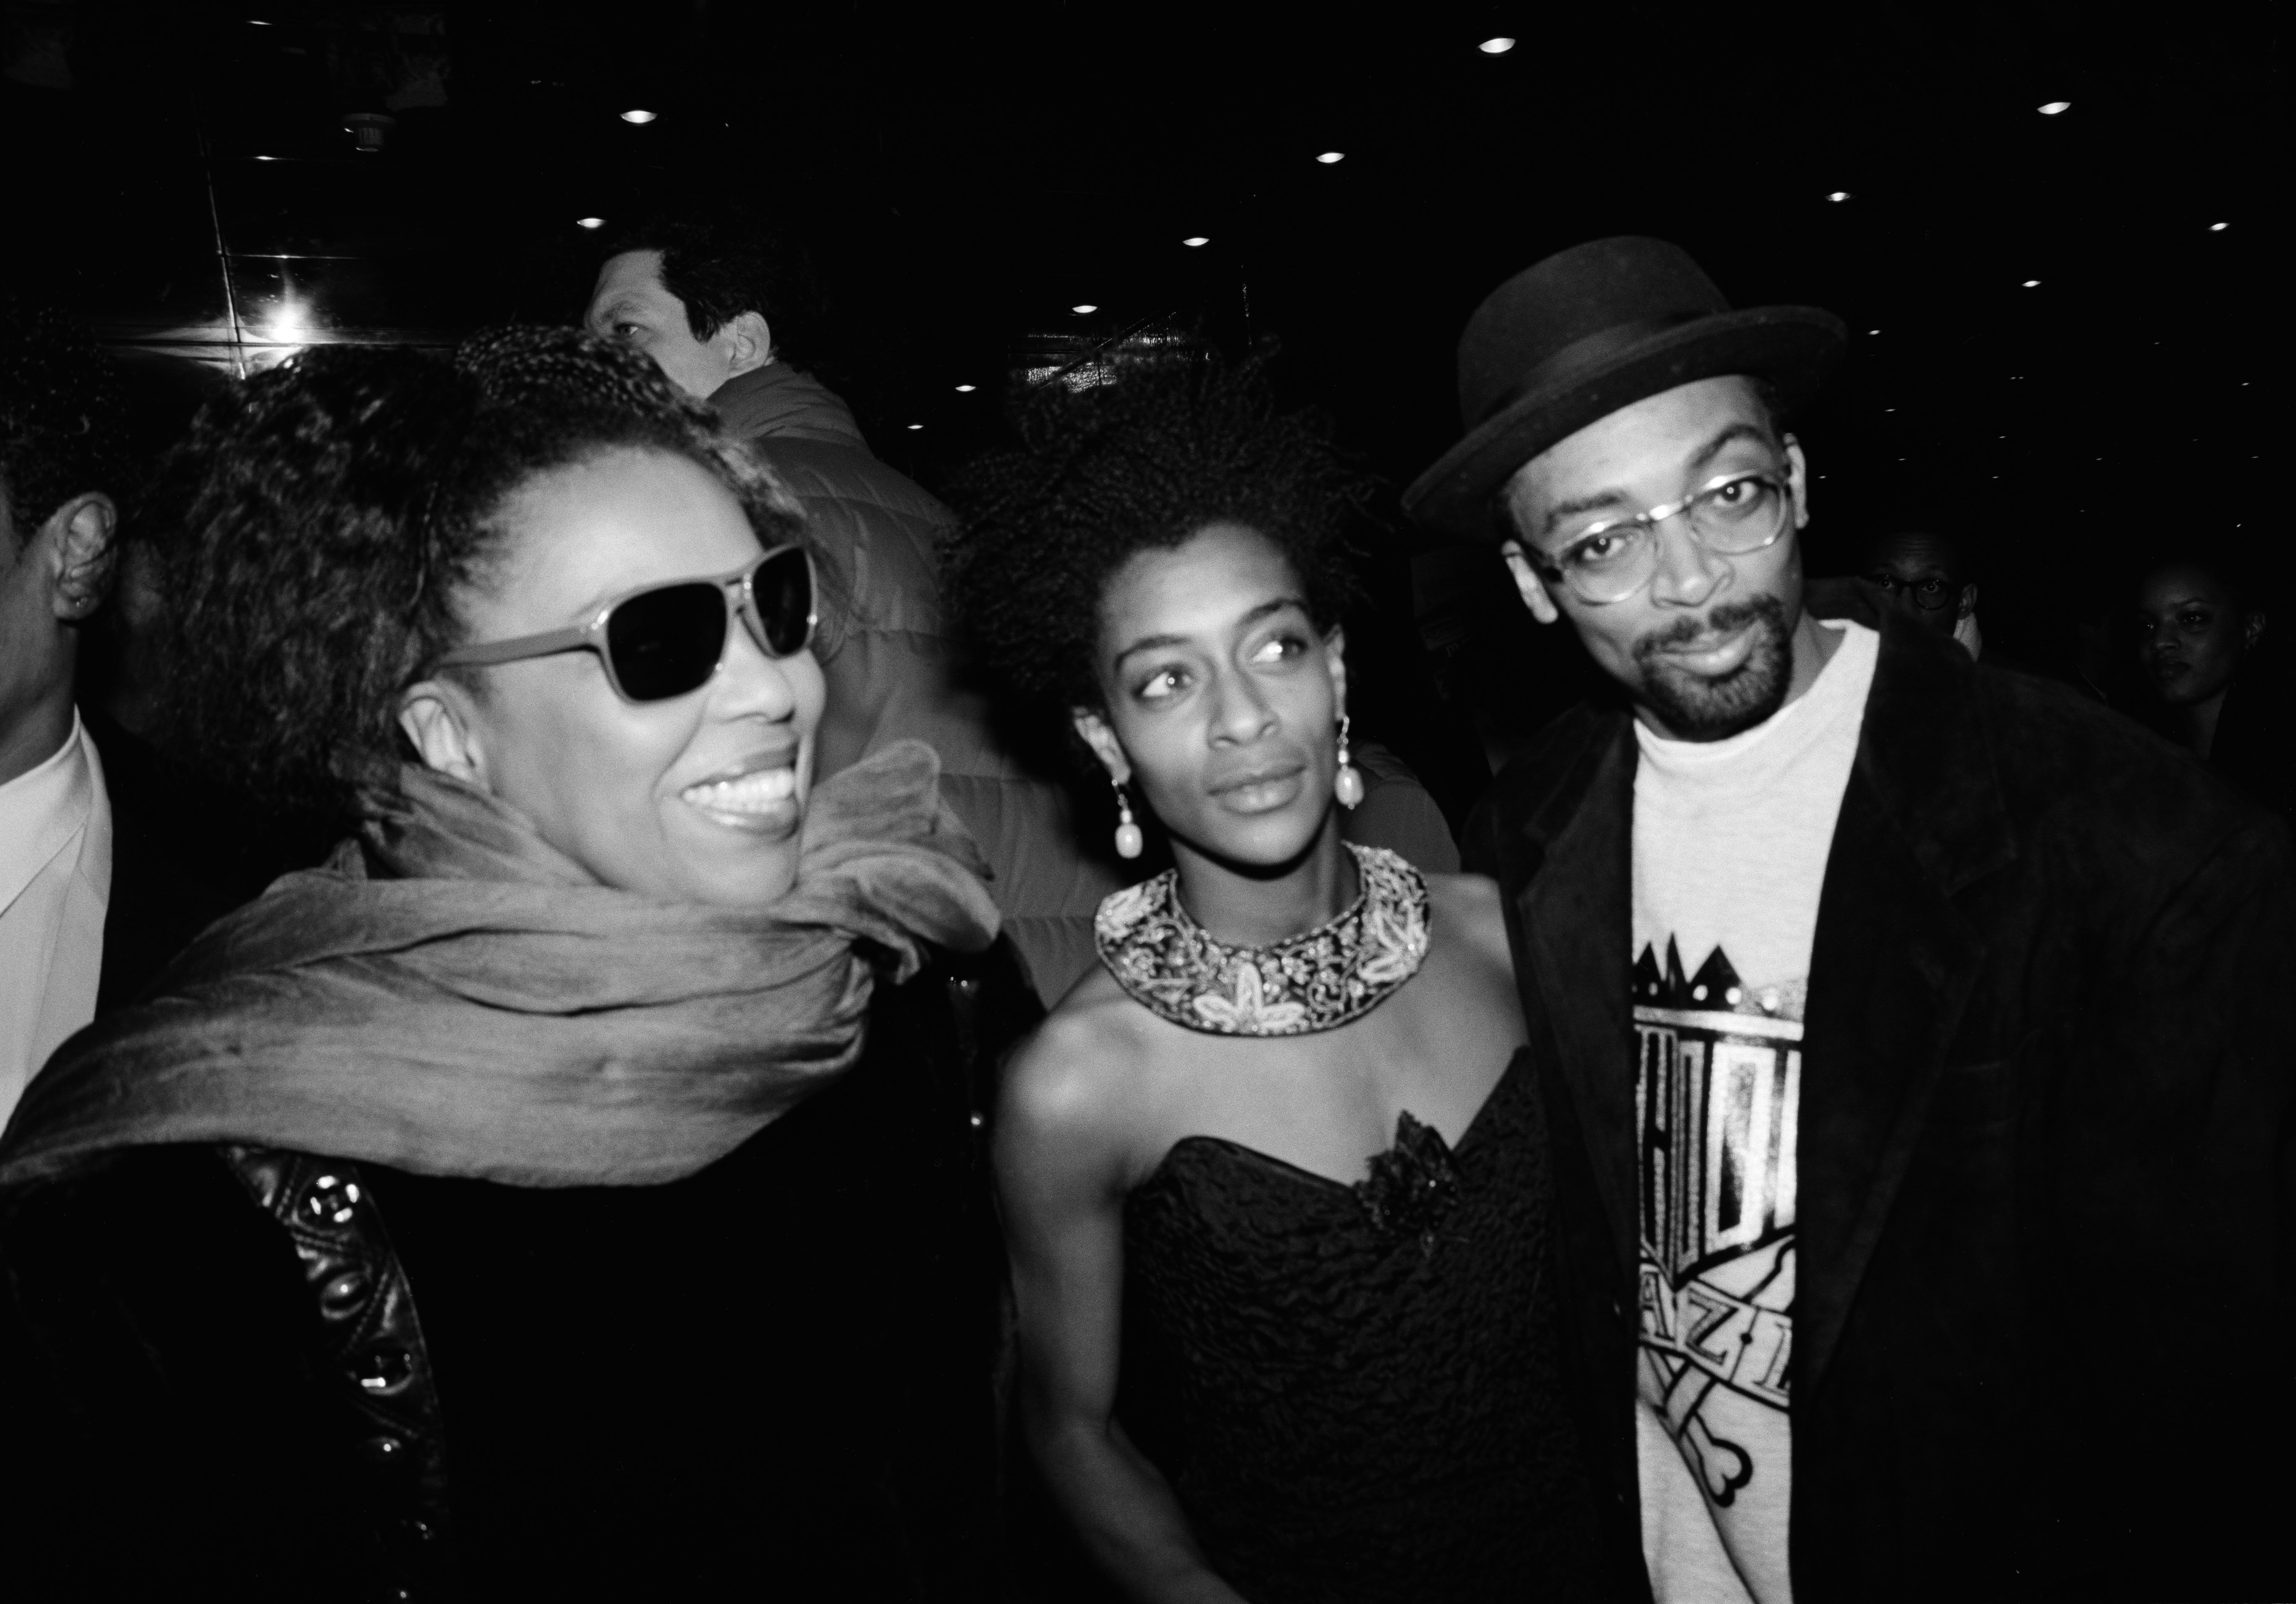 Singer Roberta Flack, actress Joie Lee, and film director Spike Lee, pose together at the Criterion Cinema during the preview of the film 'School Daze' on February 8, 1988, in New York City | Source: Getty Images